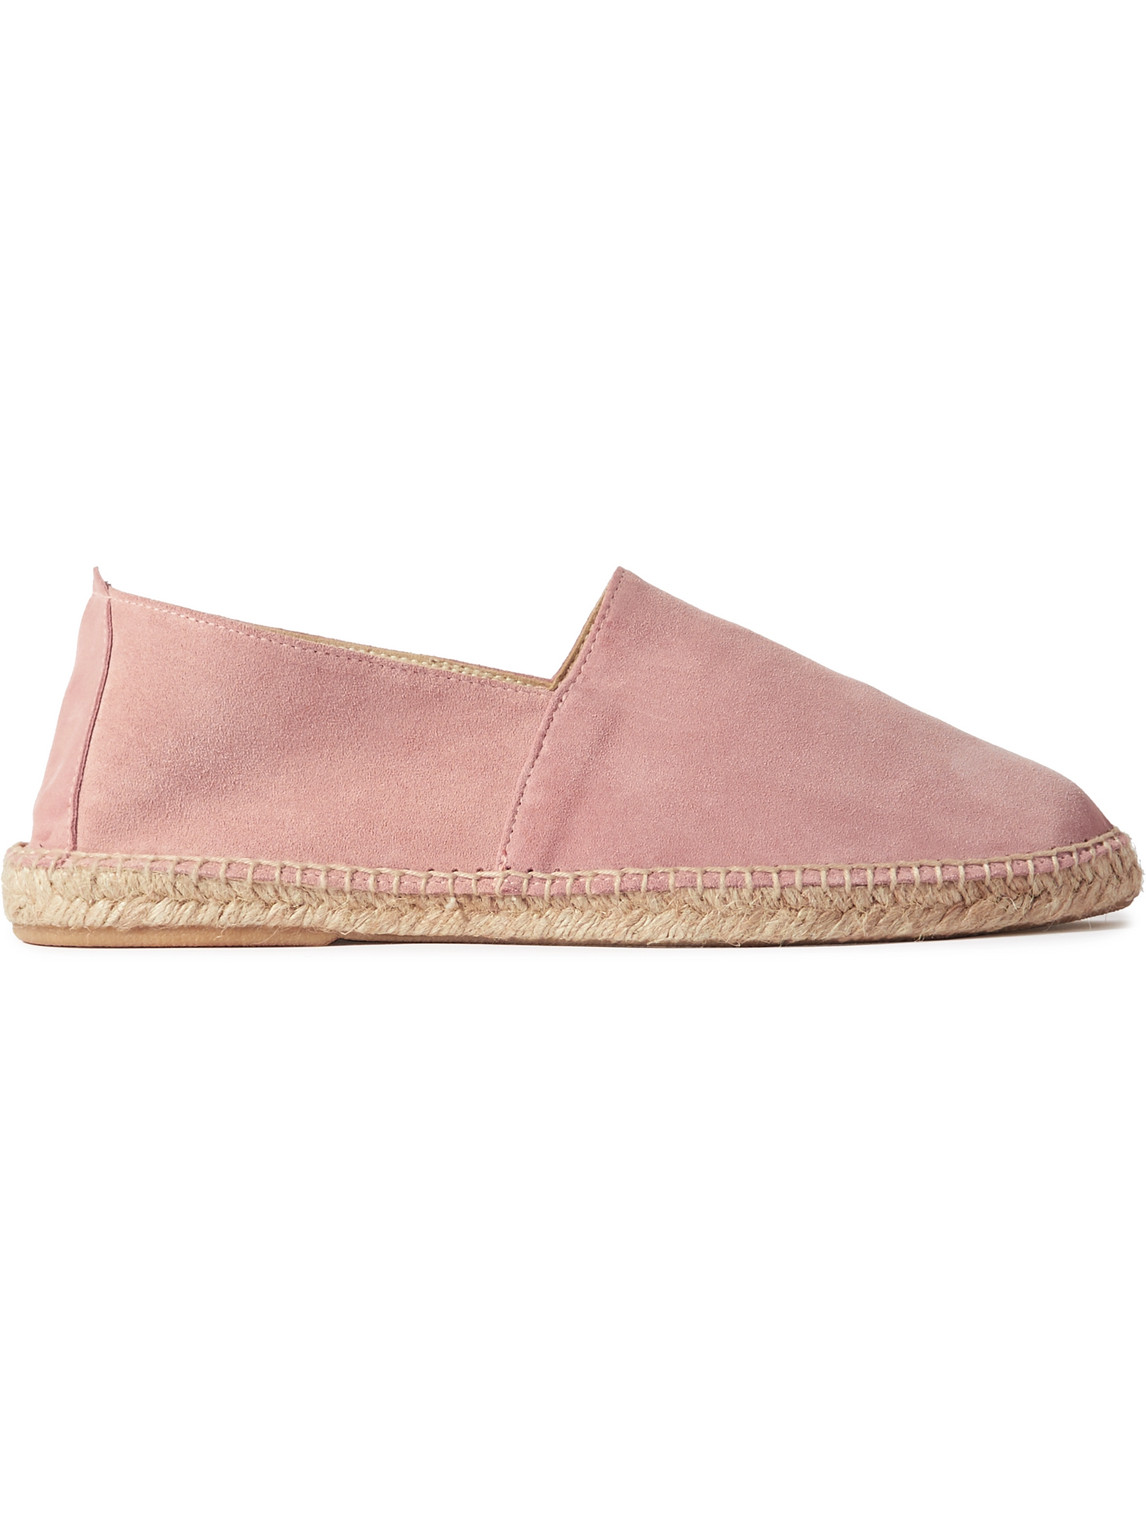 Anderson & Sheppard Suede Espadrilles In Pink